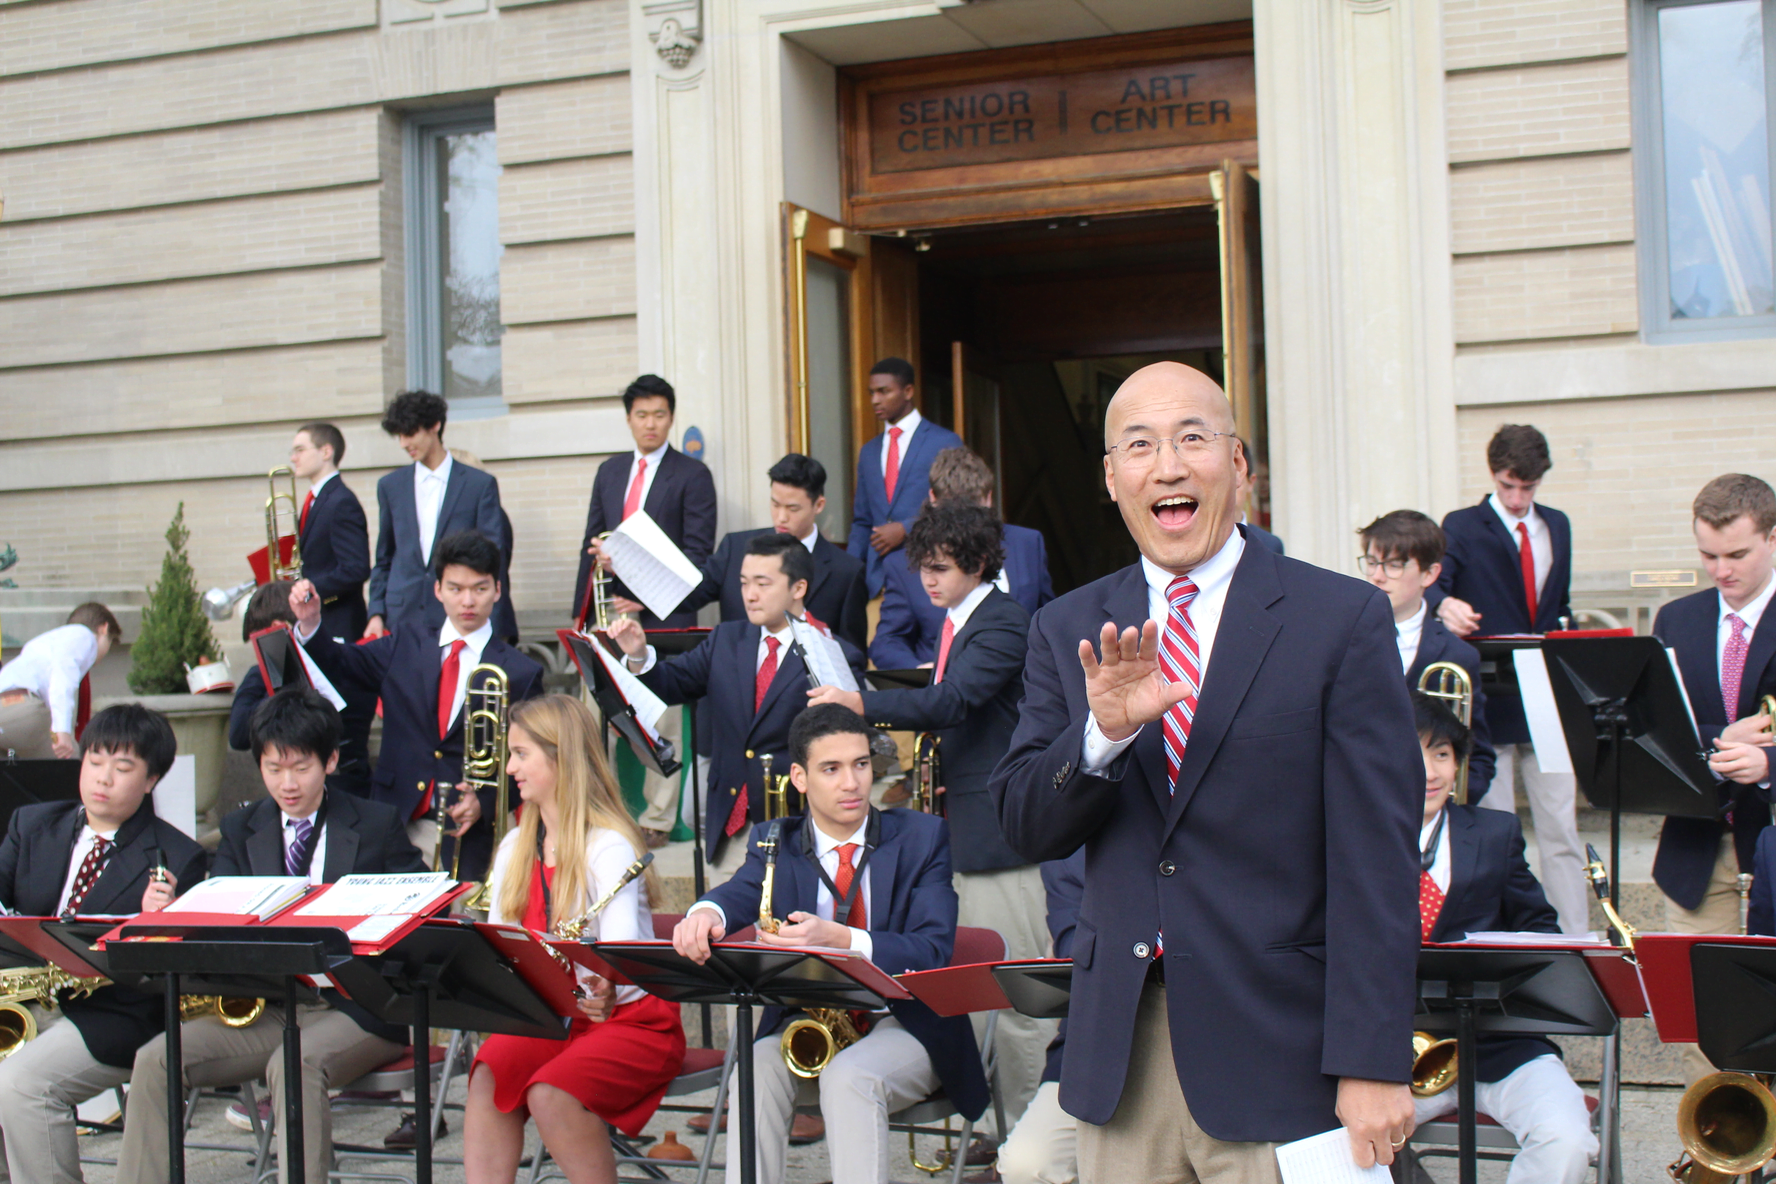 GHS band director John Yoon greeted guests outside the Greenwich Arts Council. May 4, 2017 Photo: Leslie Yager